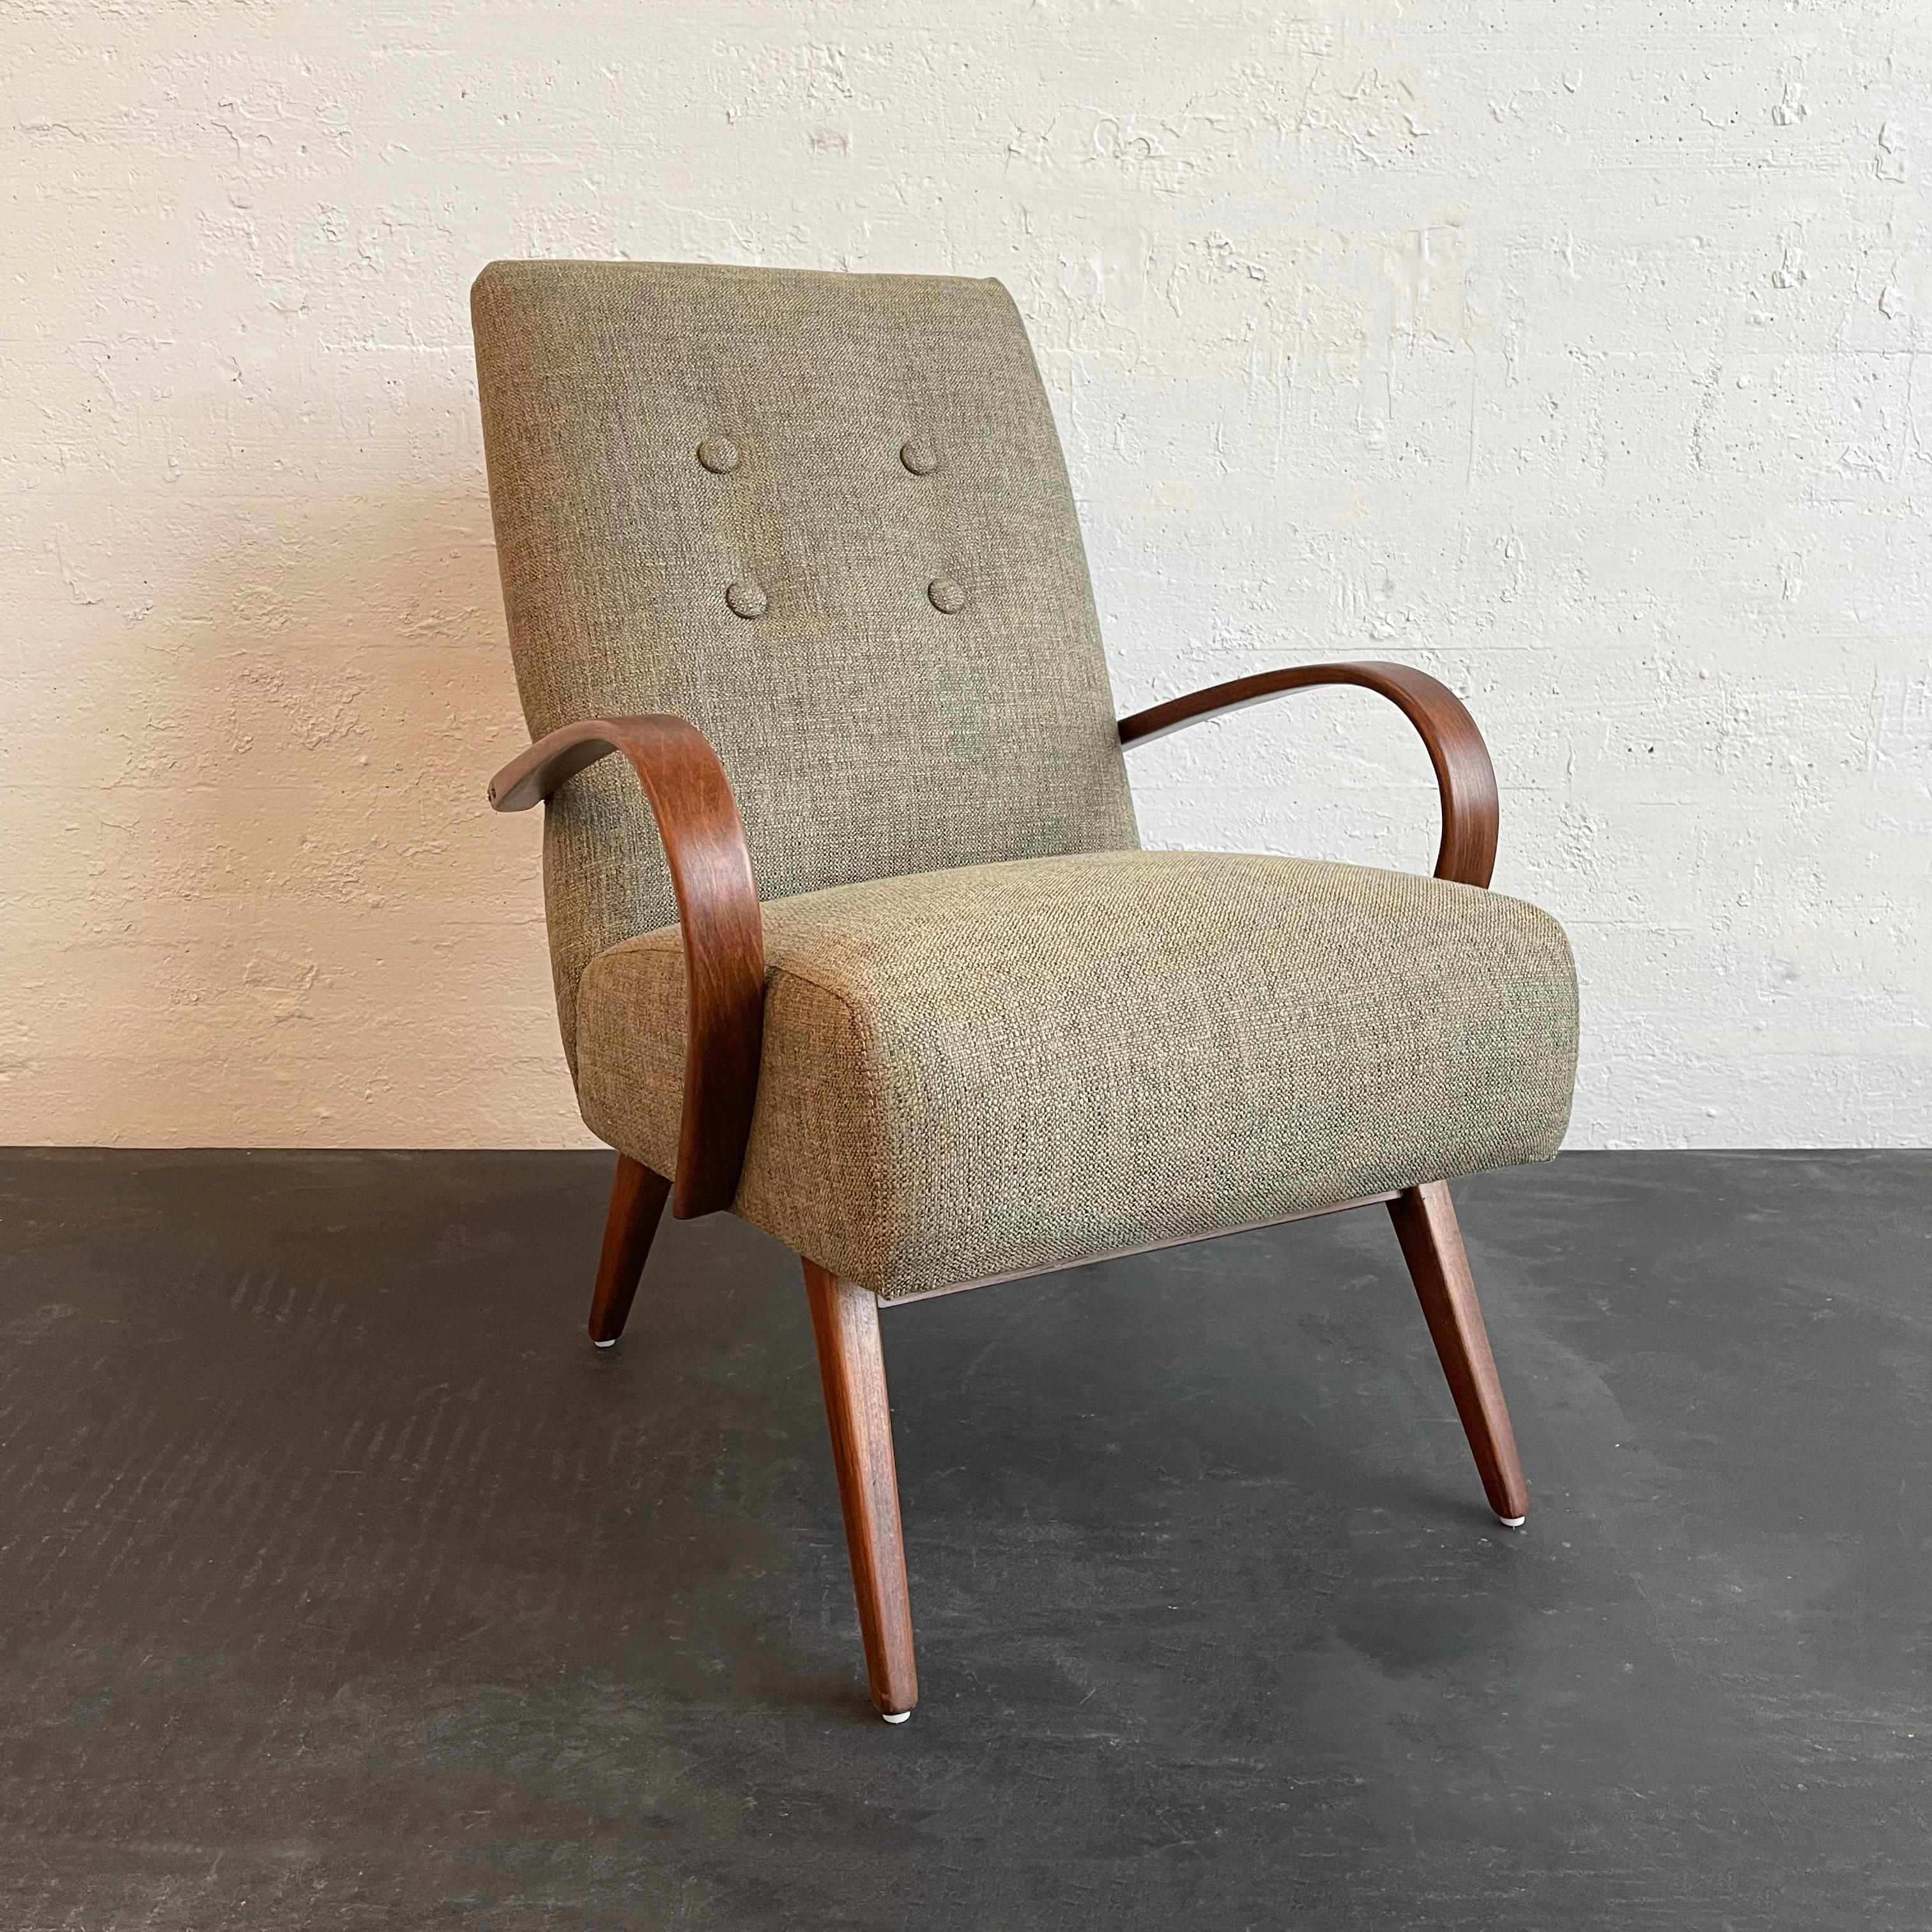 Bentwood armchair designed by Czech furniture designer Jaroslav Smidek for Ton features a bent beech wood frame and muted blue green tweed upholstery. 

Smidek learned furniture design from his father while working in the family workshop. He